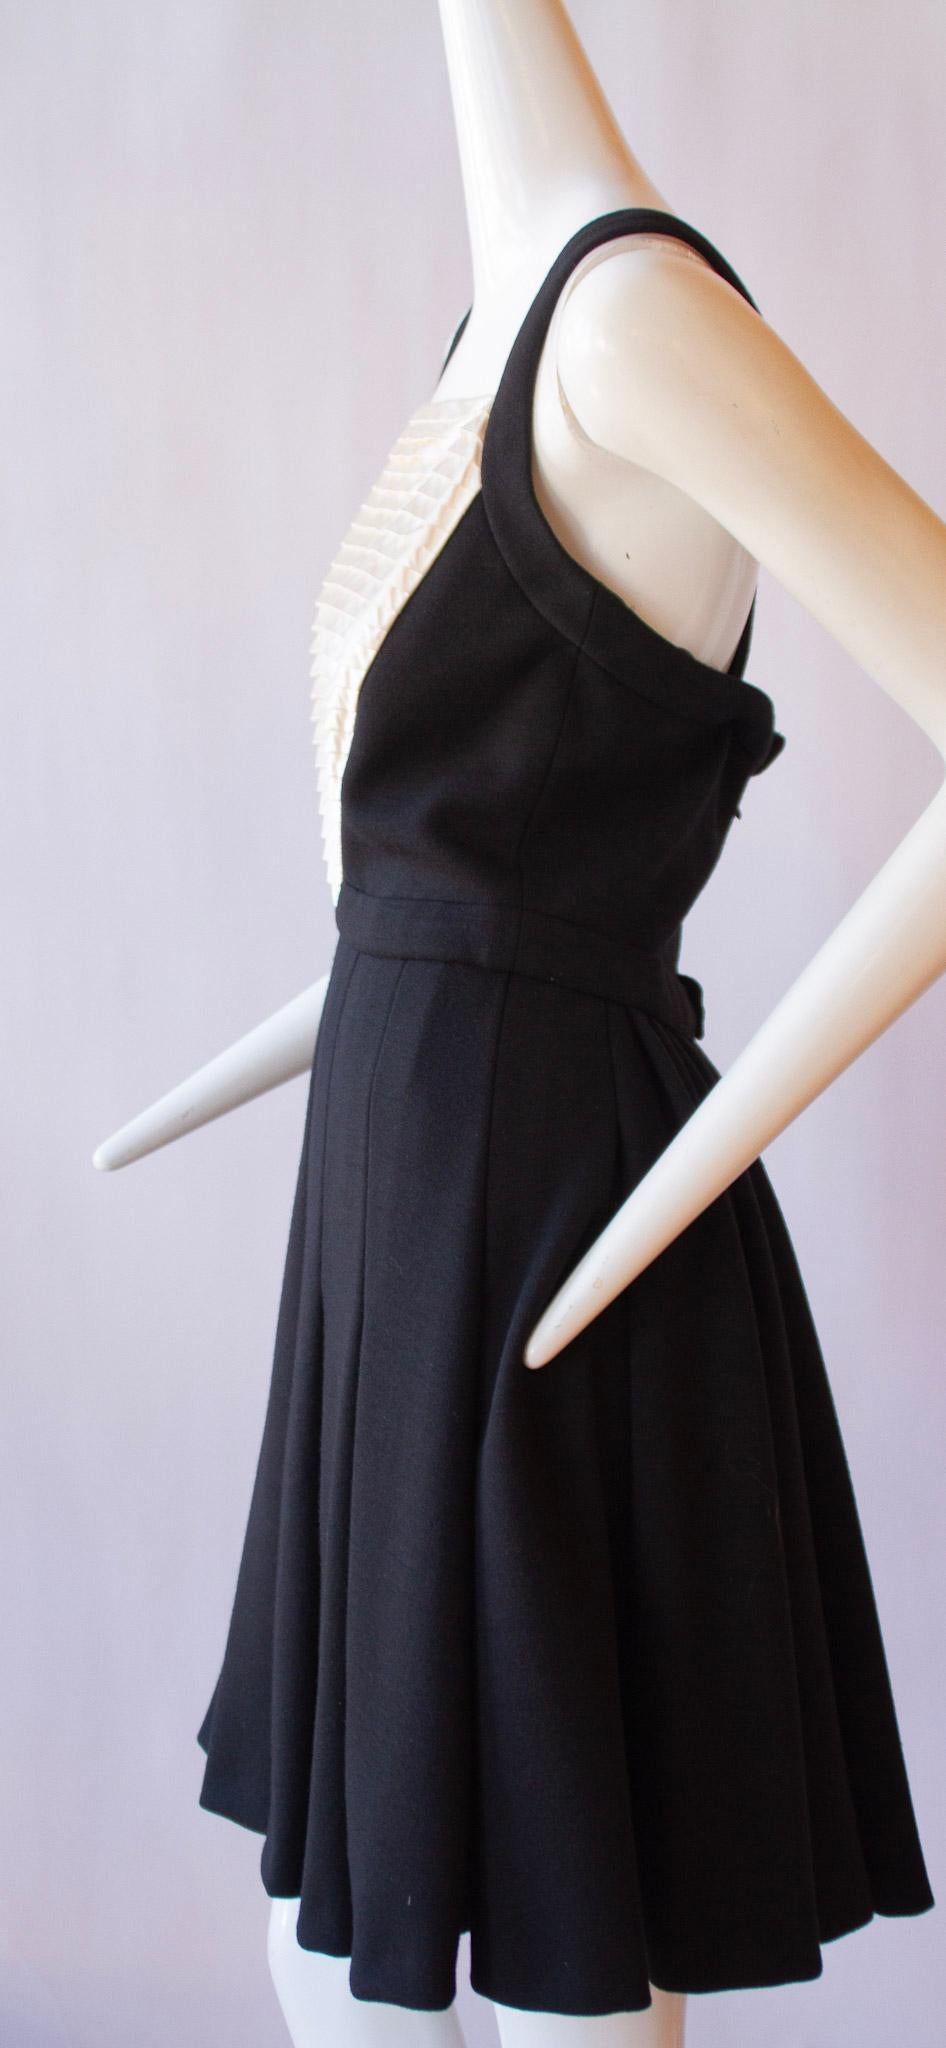 Chanel Black & White Halter Dress with Pleats  1